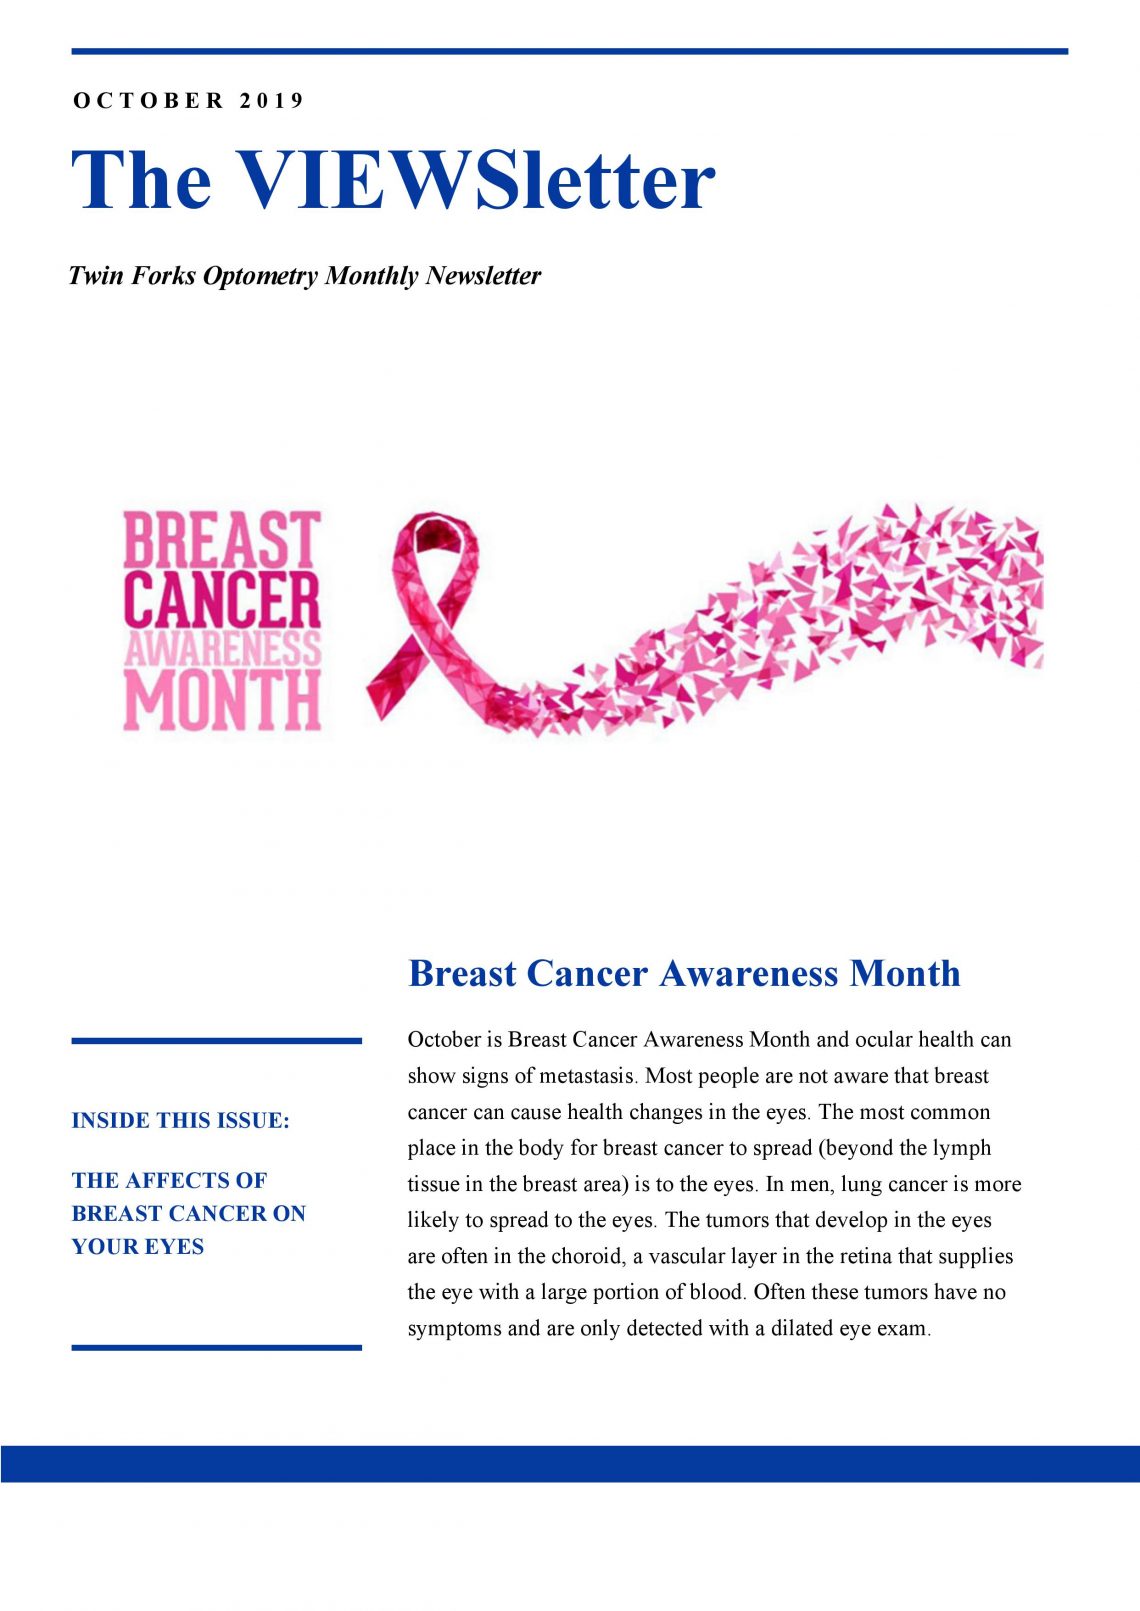 October Is Breast Cancer Awareness Month!